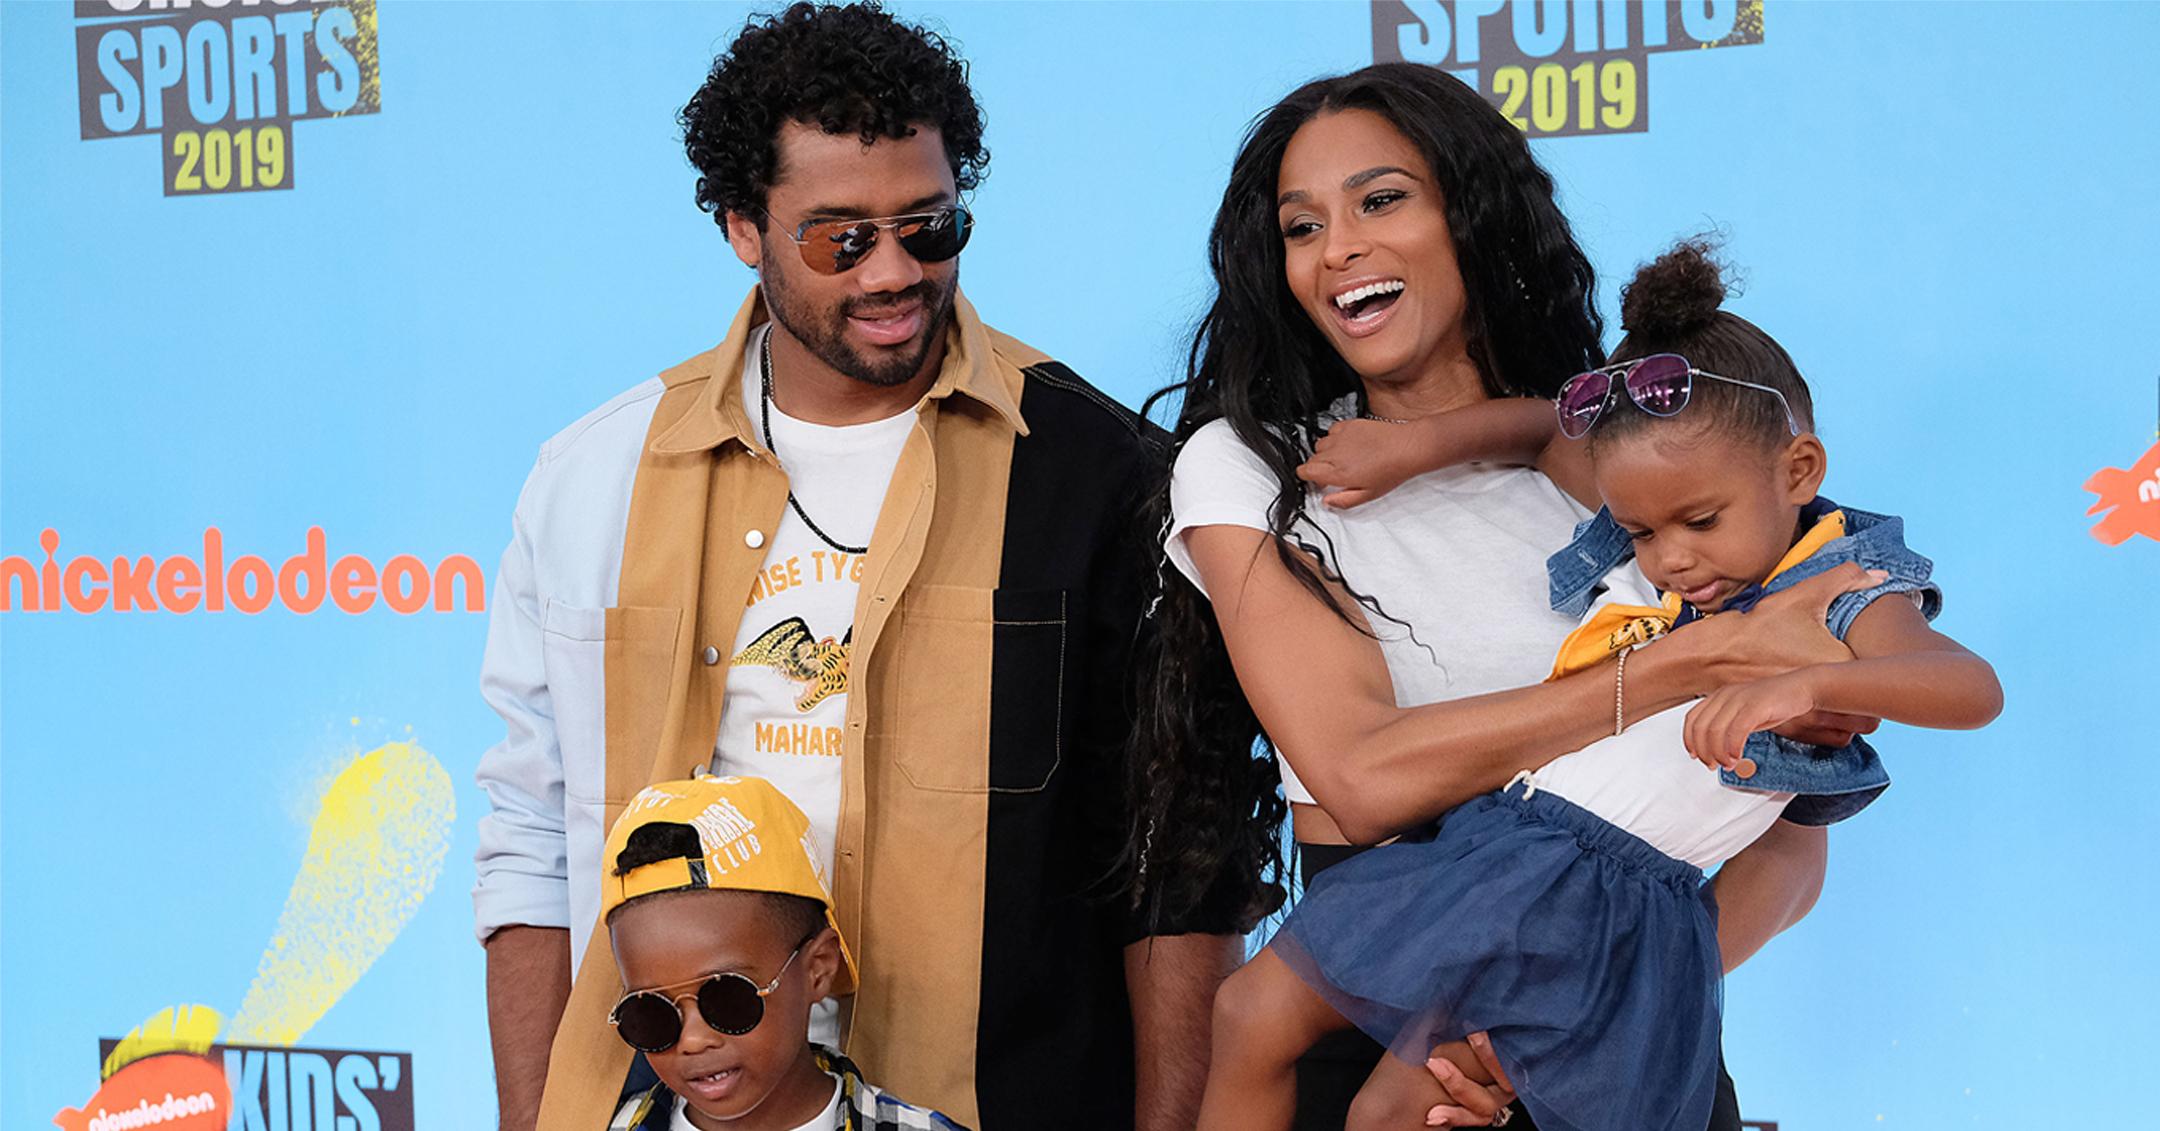 All About Ciara and Russell Wilson's 4 Kids